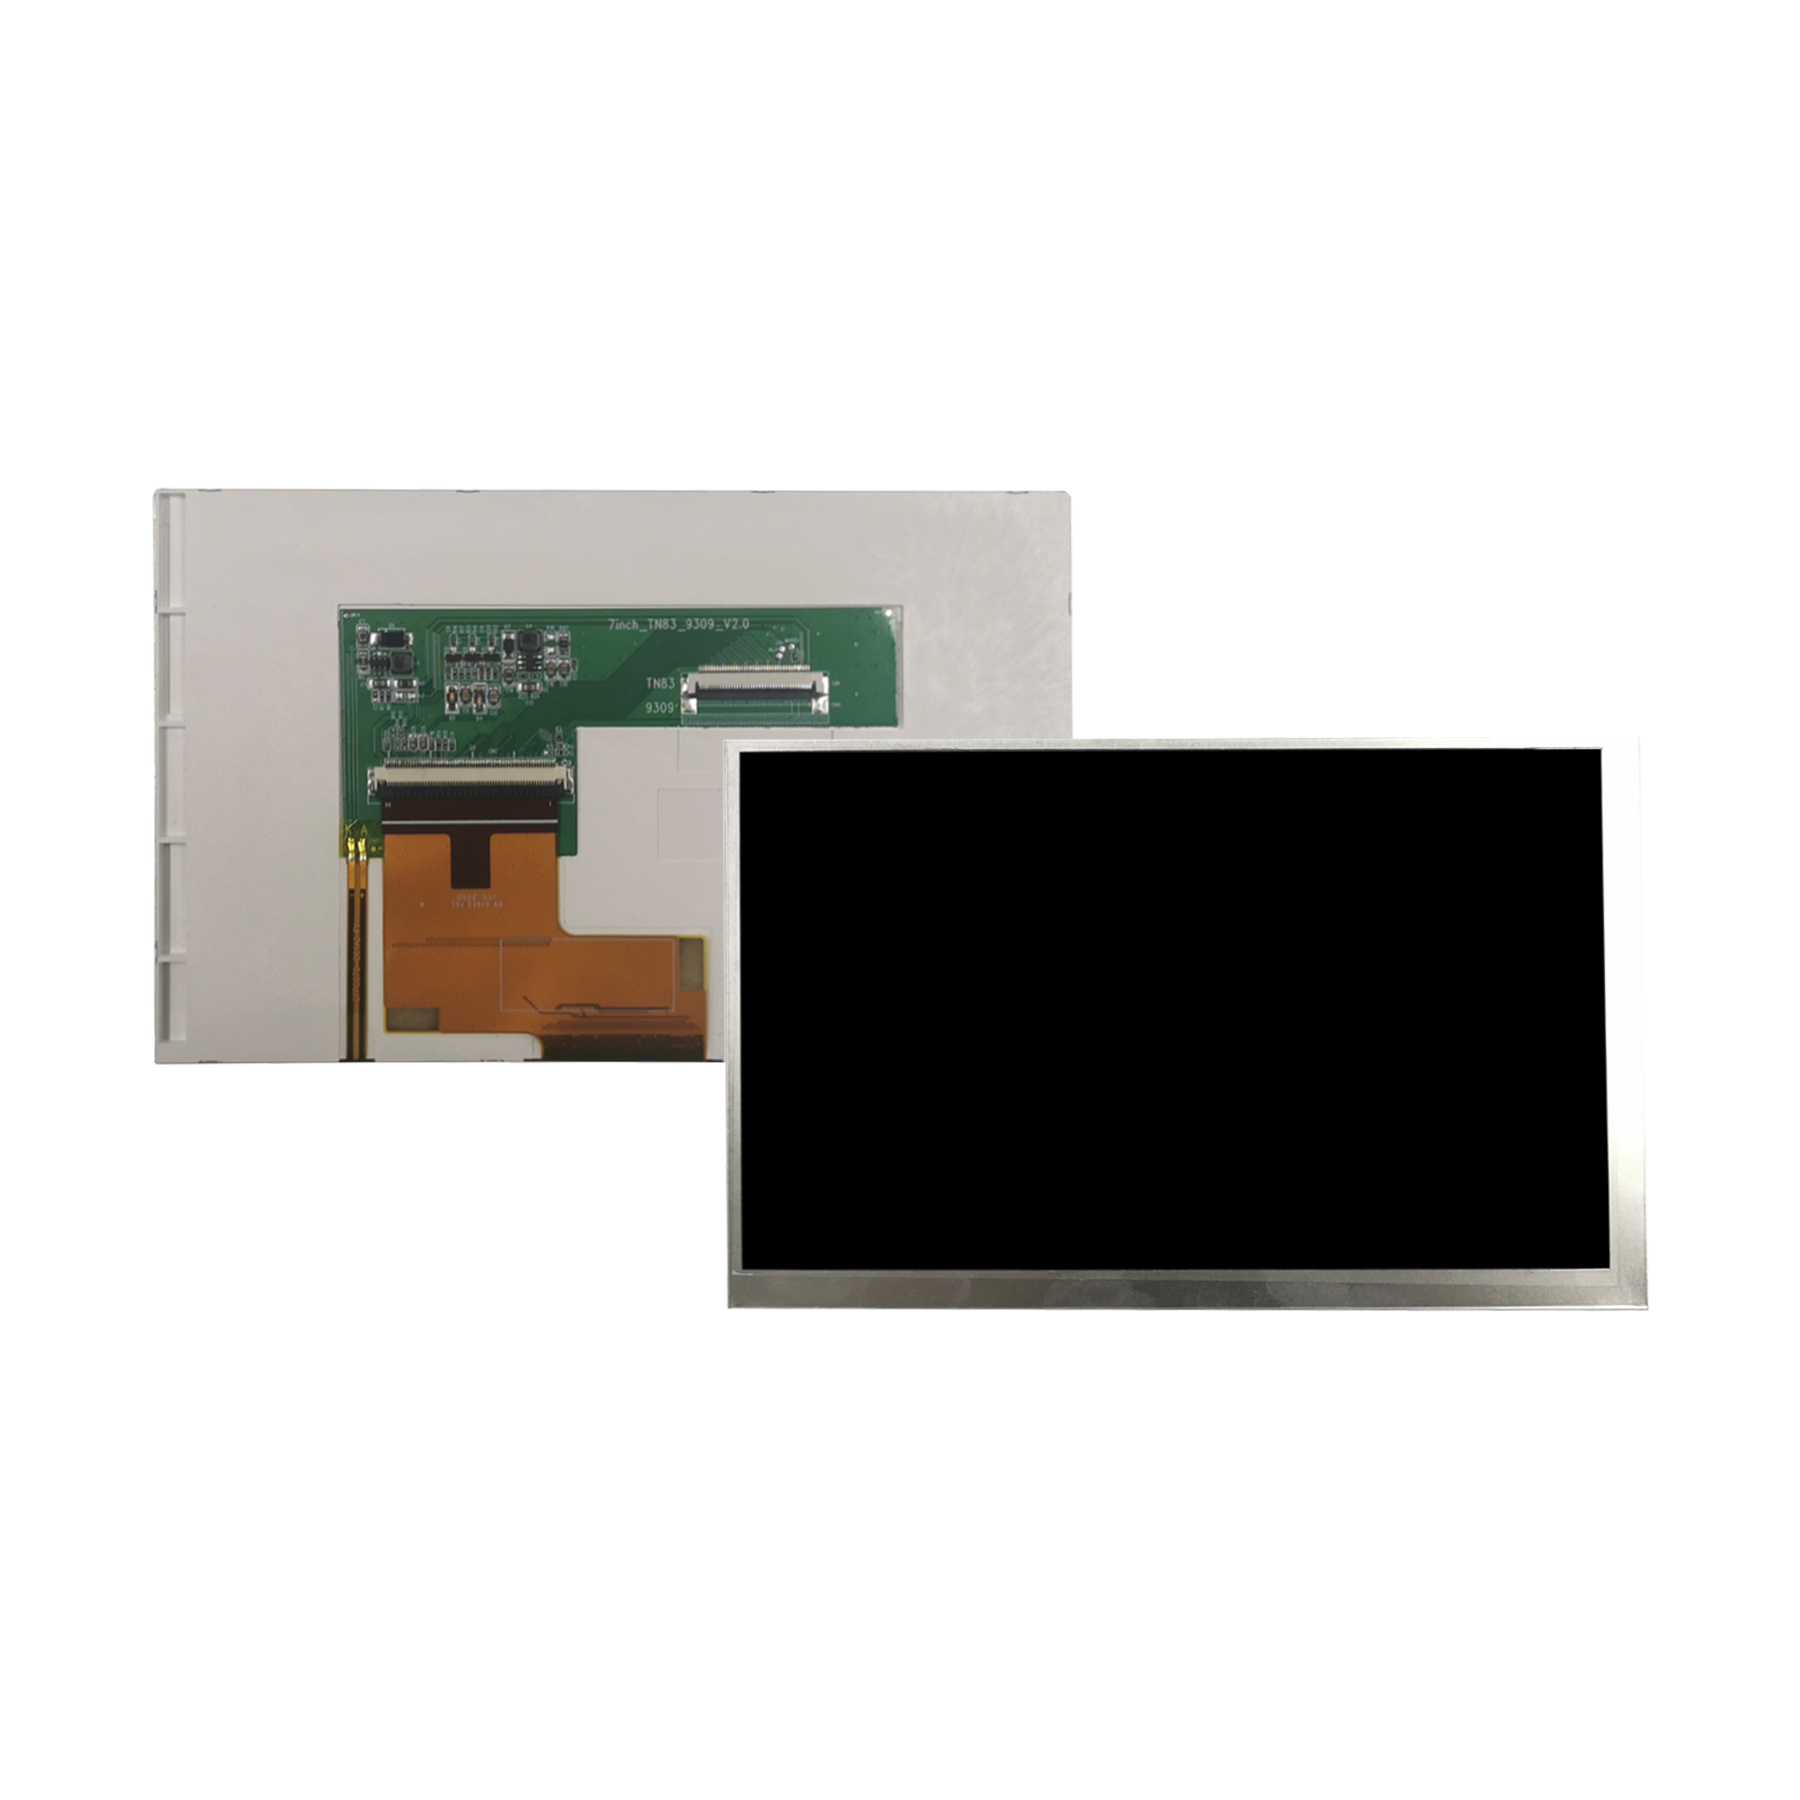 TFT Panel With Controller Board